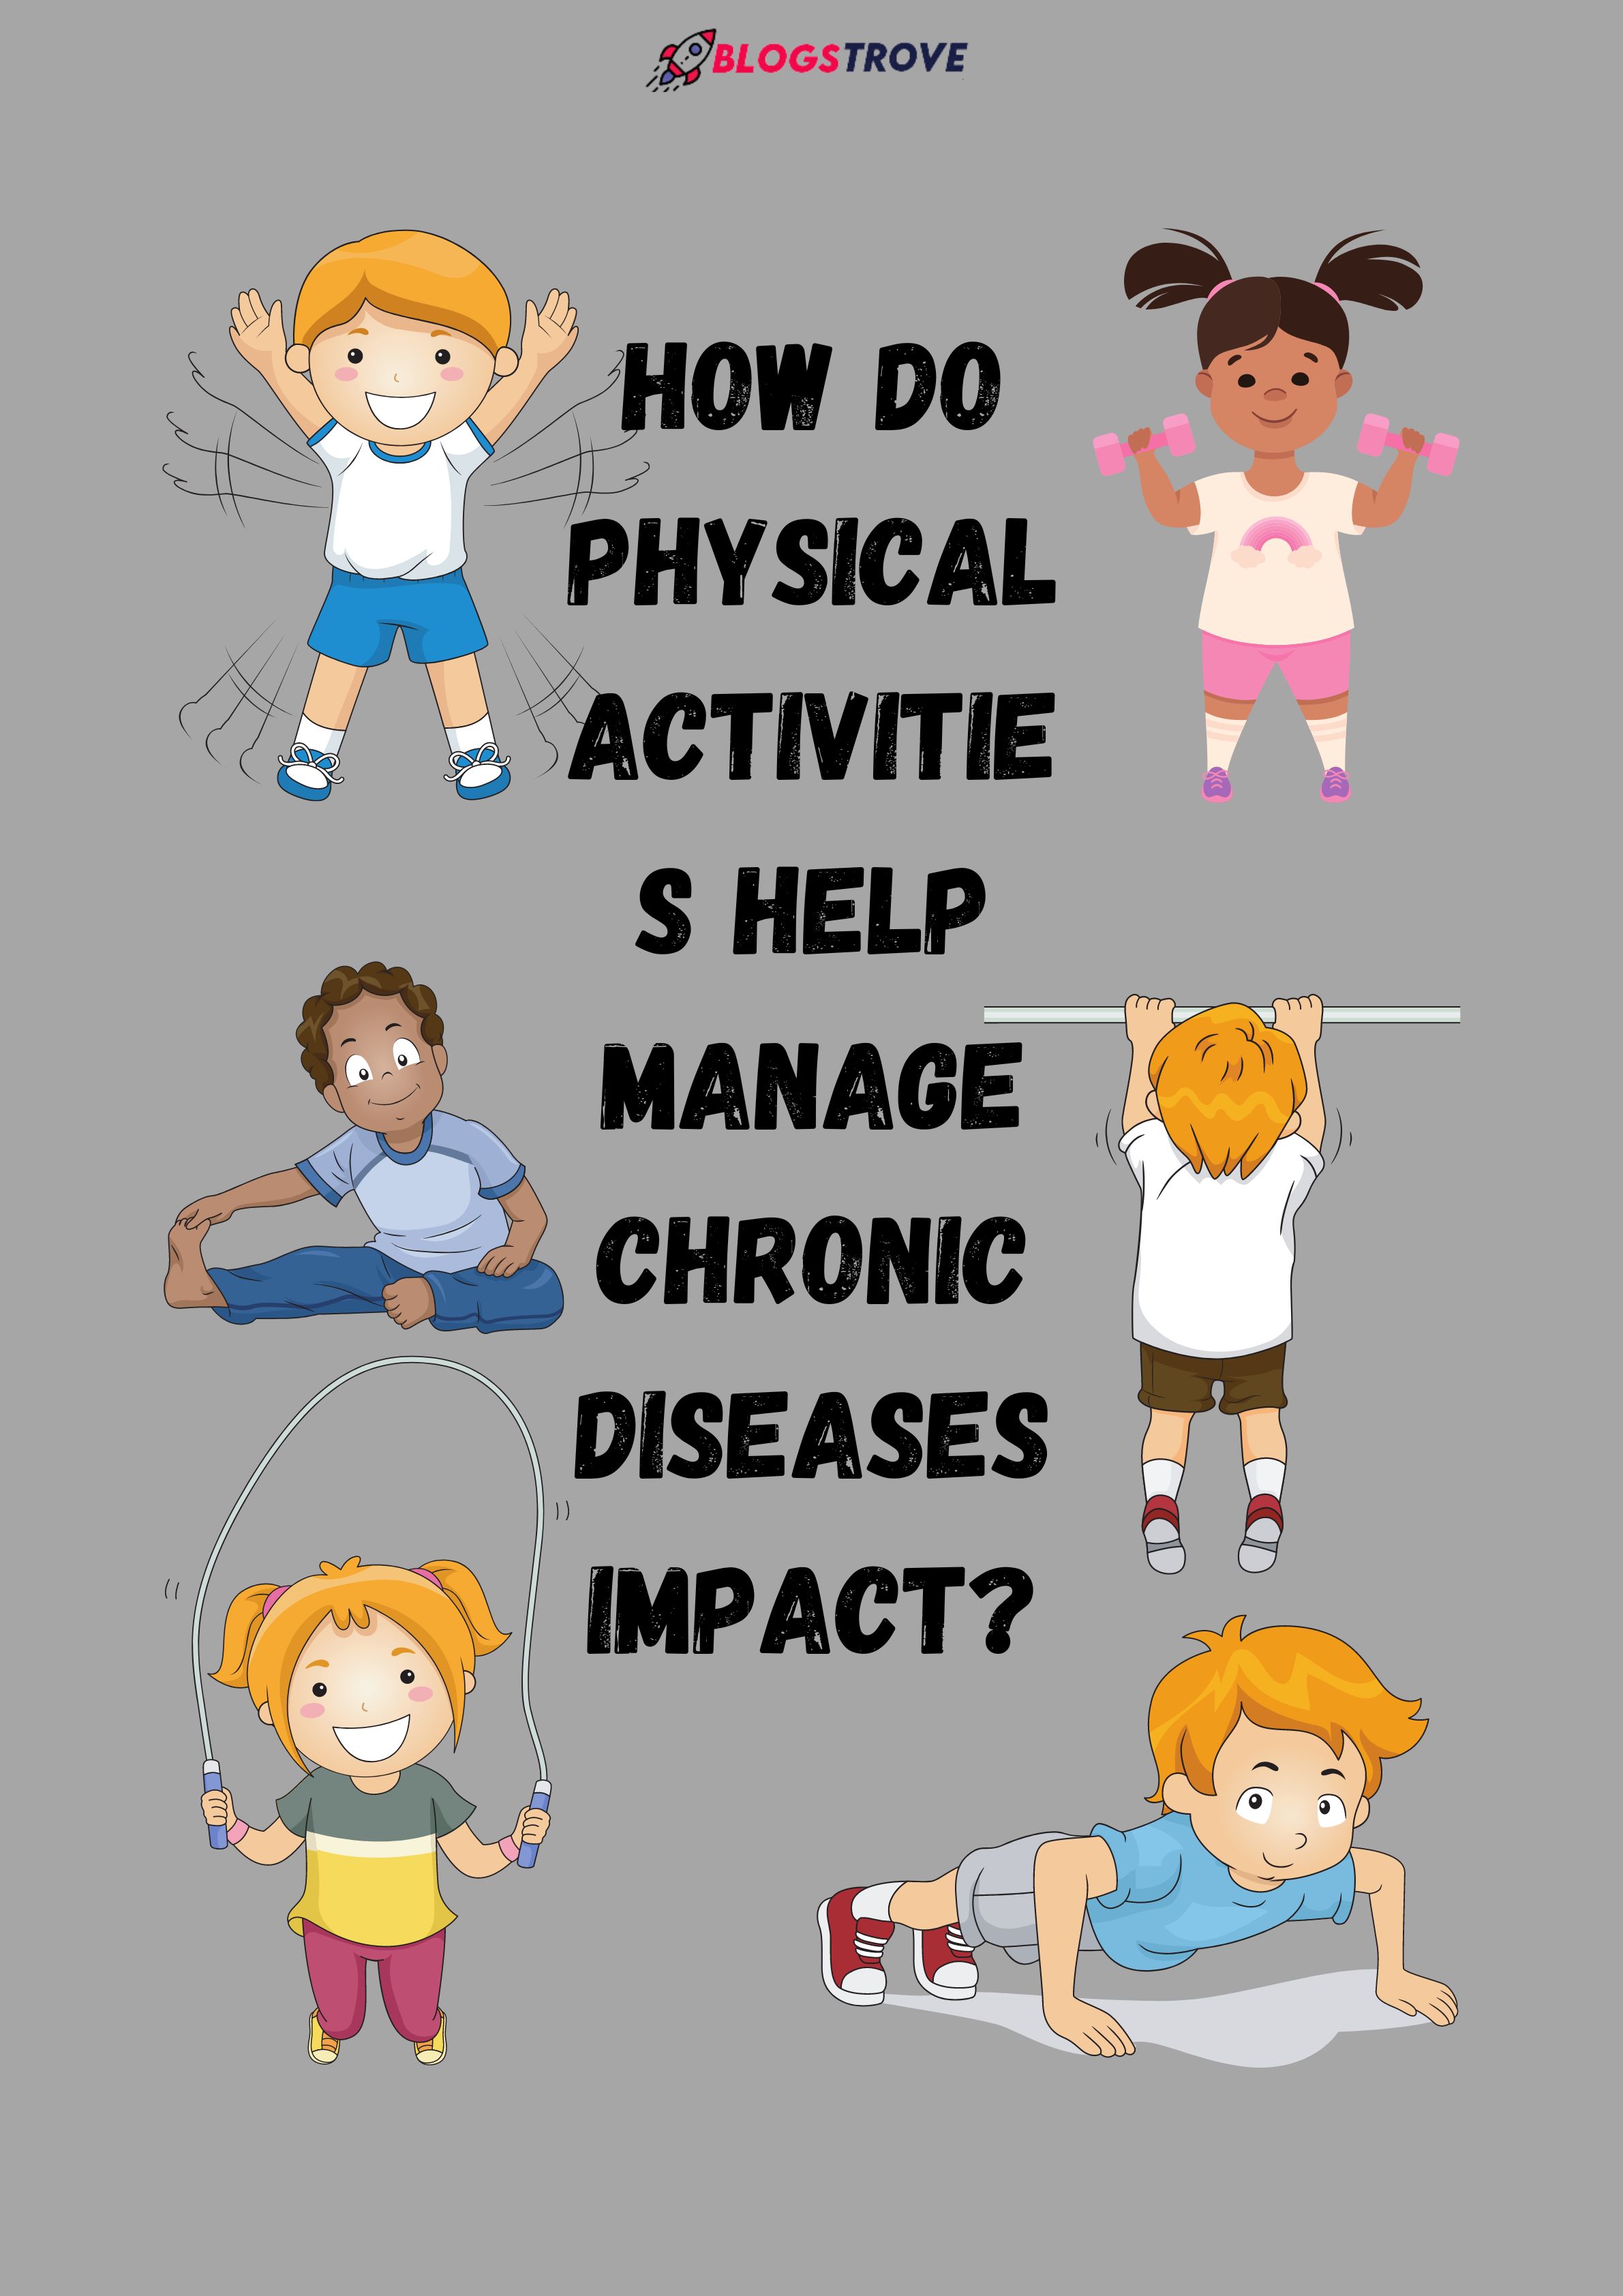 How Do Physical Activities Help Manage Chronic Diseases Impact?